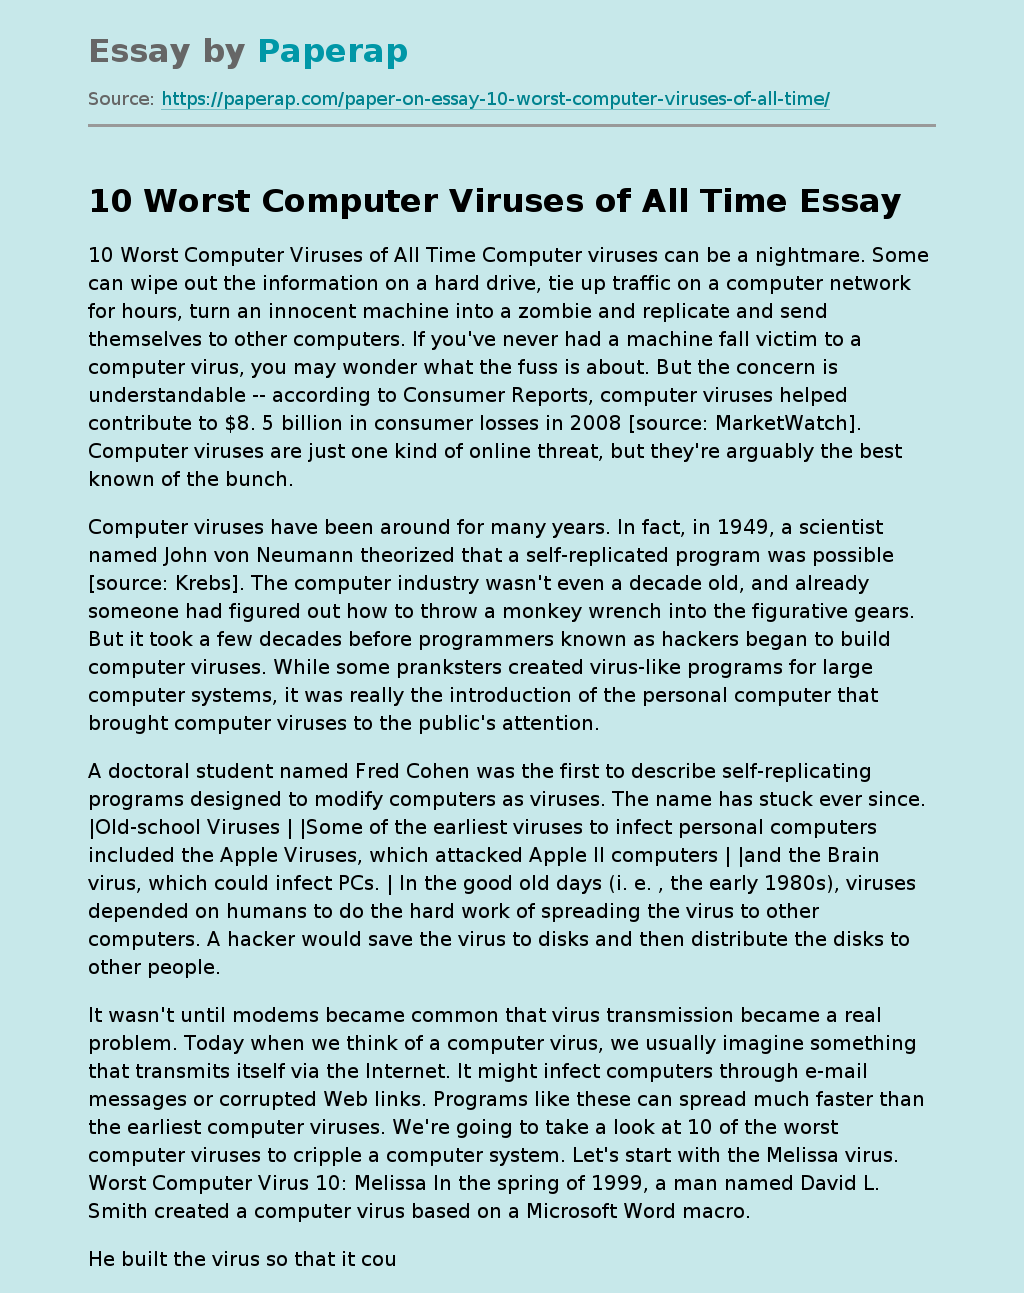 10 Worst Computer Viruses of All Time